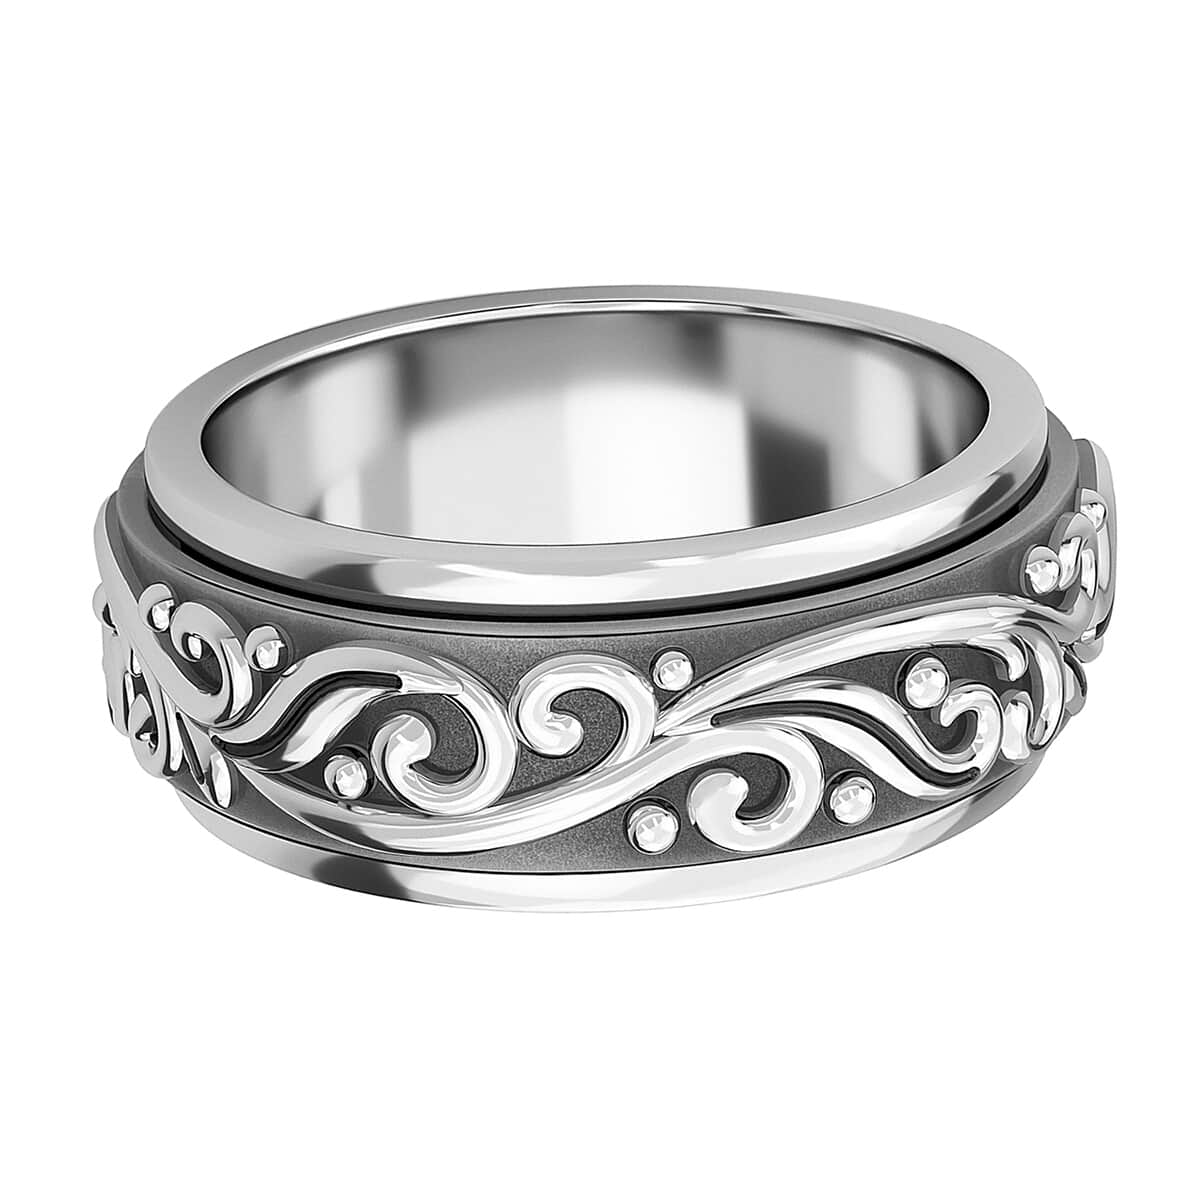 Spinner Band Ring in Sterling Silver, Anxiety Ring for Women, 925 Sterling Silver Spinner Ring, Fidget Rings for Anxiety for Women, Stress Relieving Anxiety Ring, Promise Rings (Size 7.0) (7.65 g) image number 7